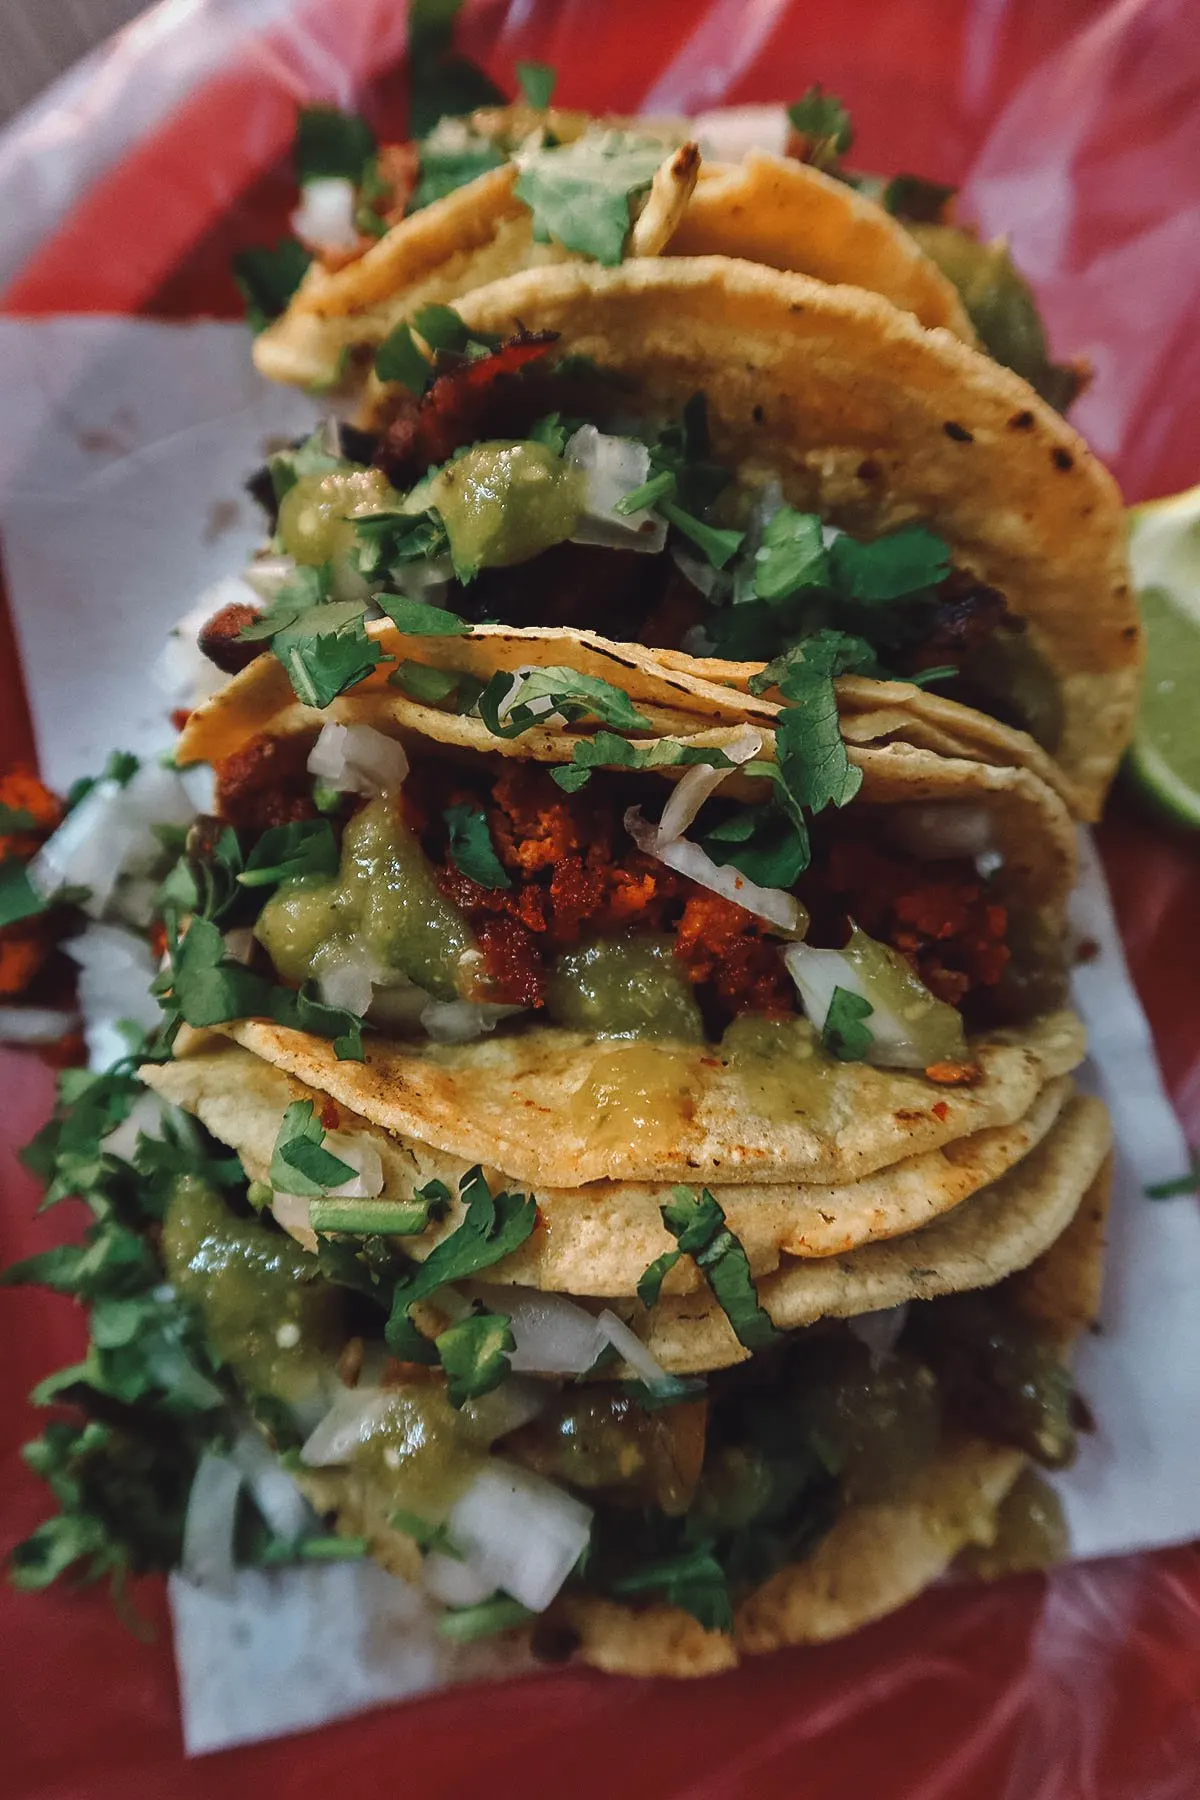 Set of 4 tacos with salsa verde at a restaurant in Guanajuato